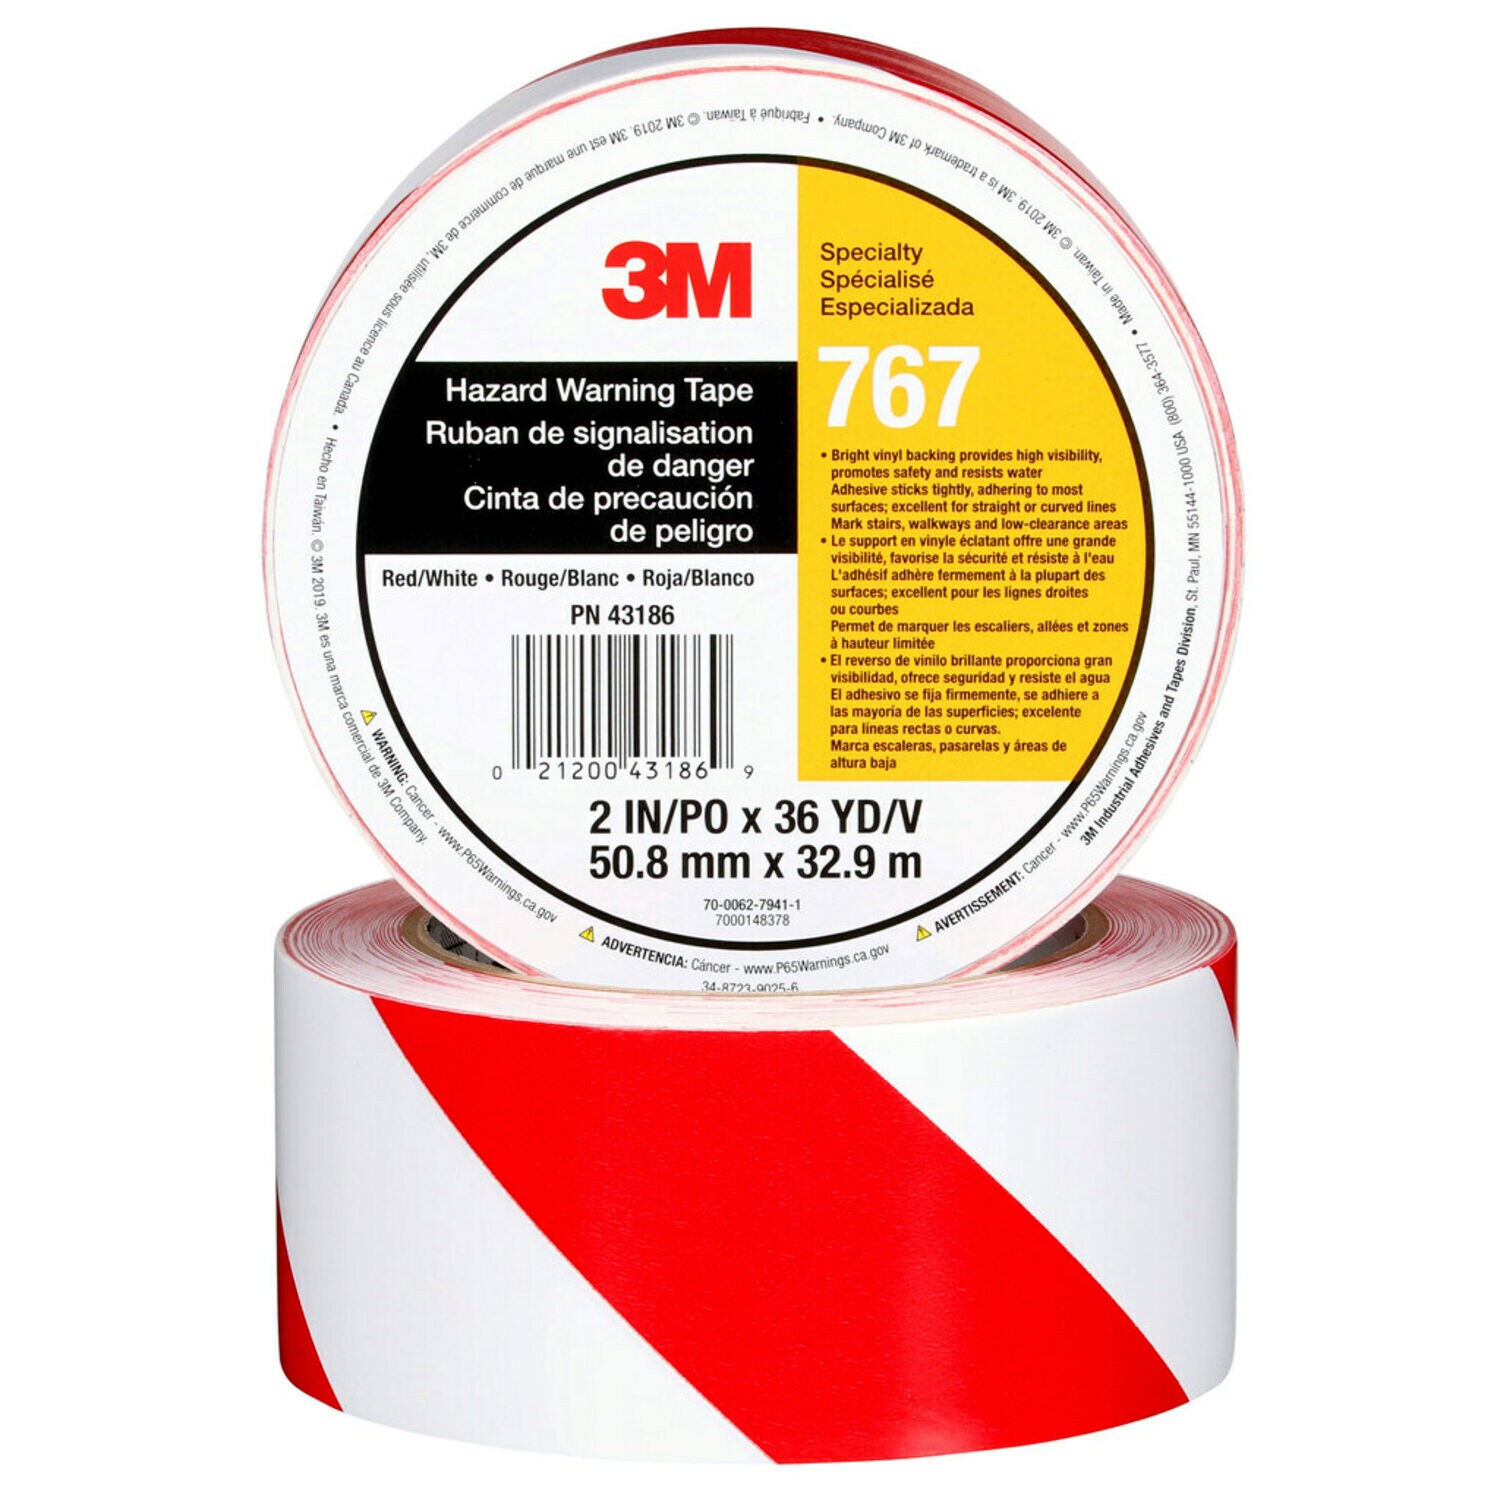 7000148378 - 3M Safety Stripe Vinyl Tape 767, Red/White, 2 in x 36 yd, 5 mil, 24 Roll/Case, Individually Wrapped Conveniently Packaged